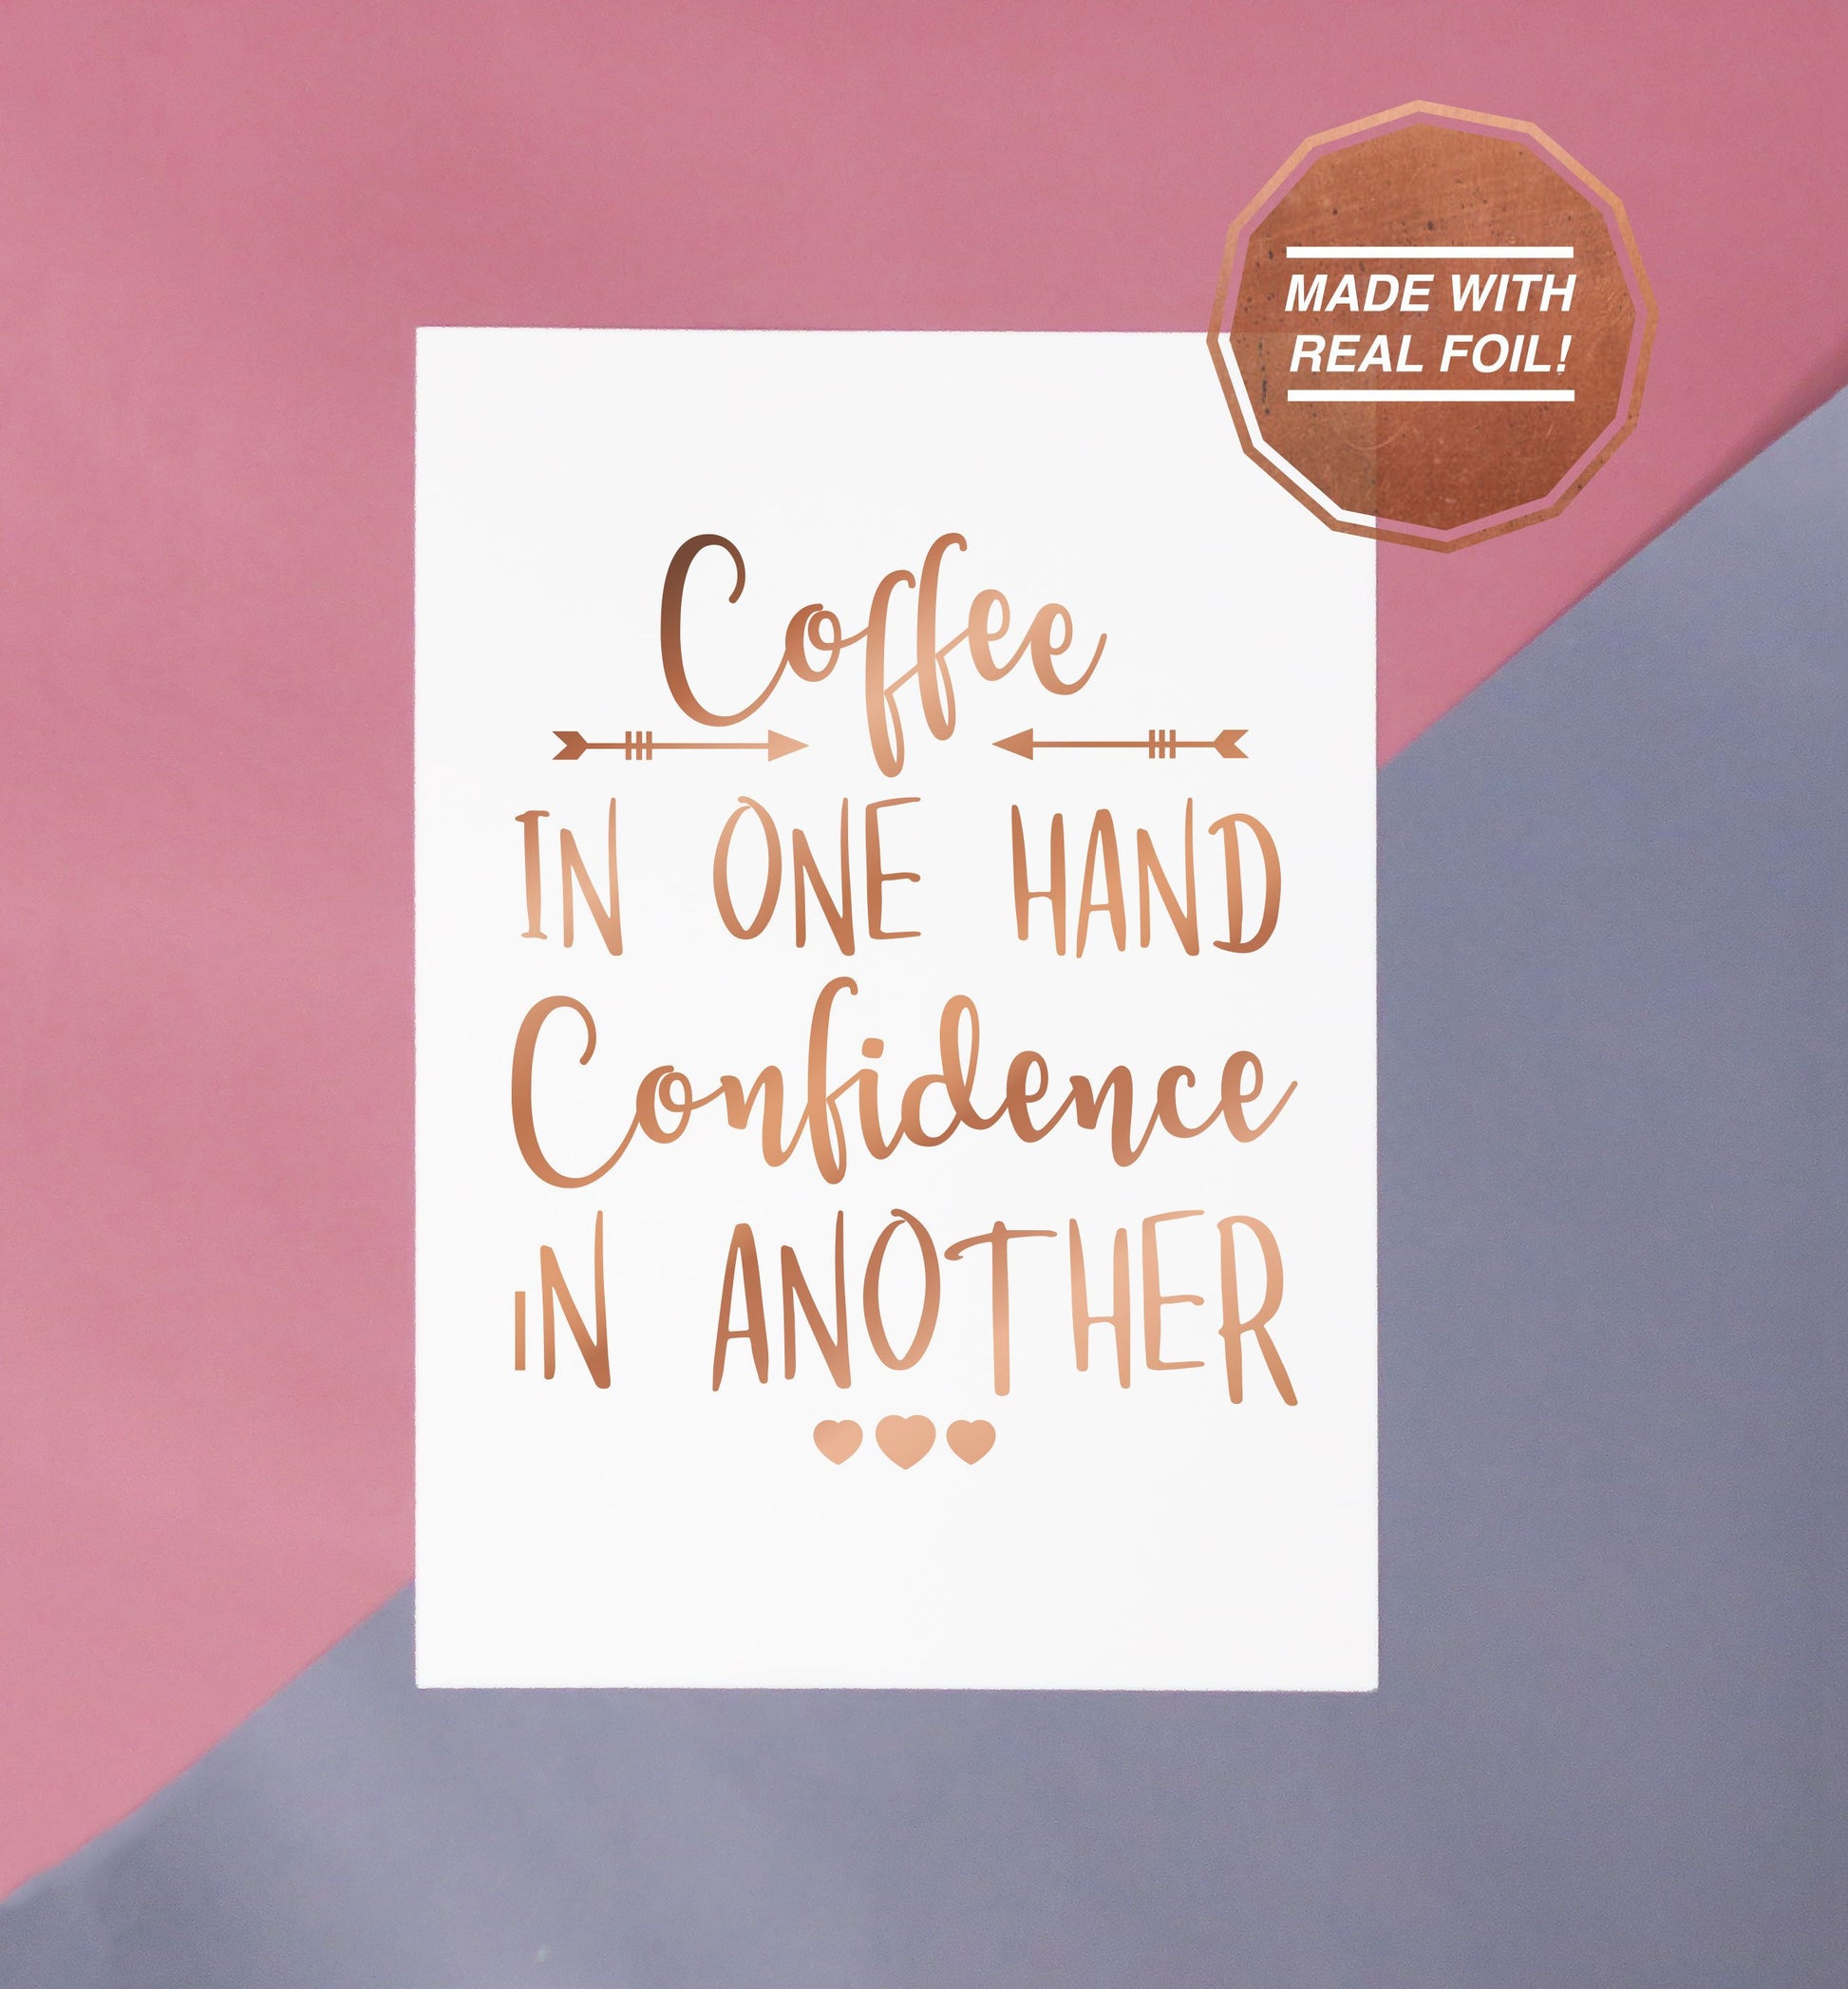 Coffee in one hand confidence in another sassy quote handmade rose gold foiled print perfect for the office or home